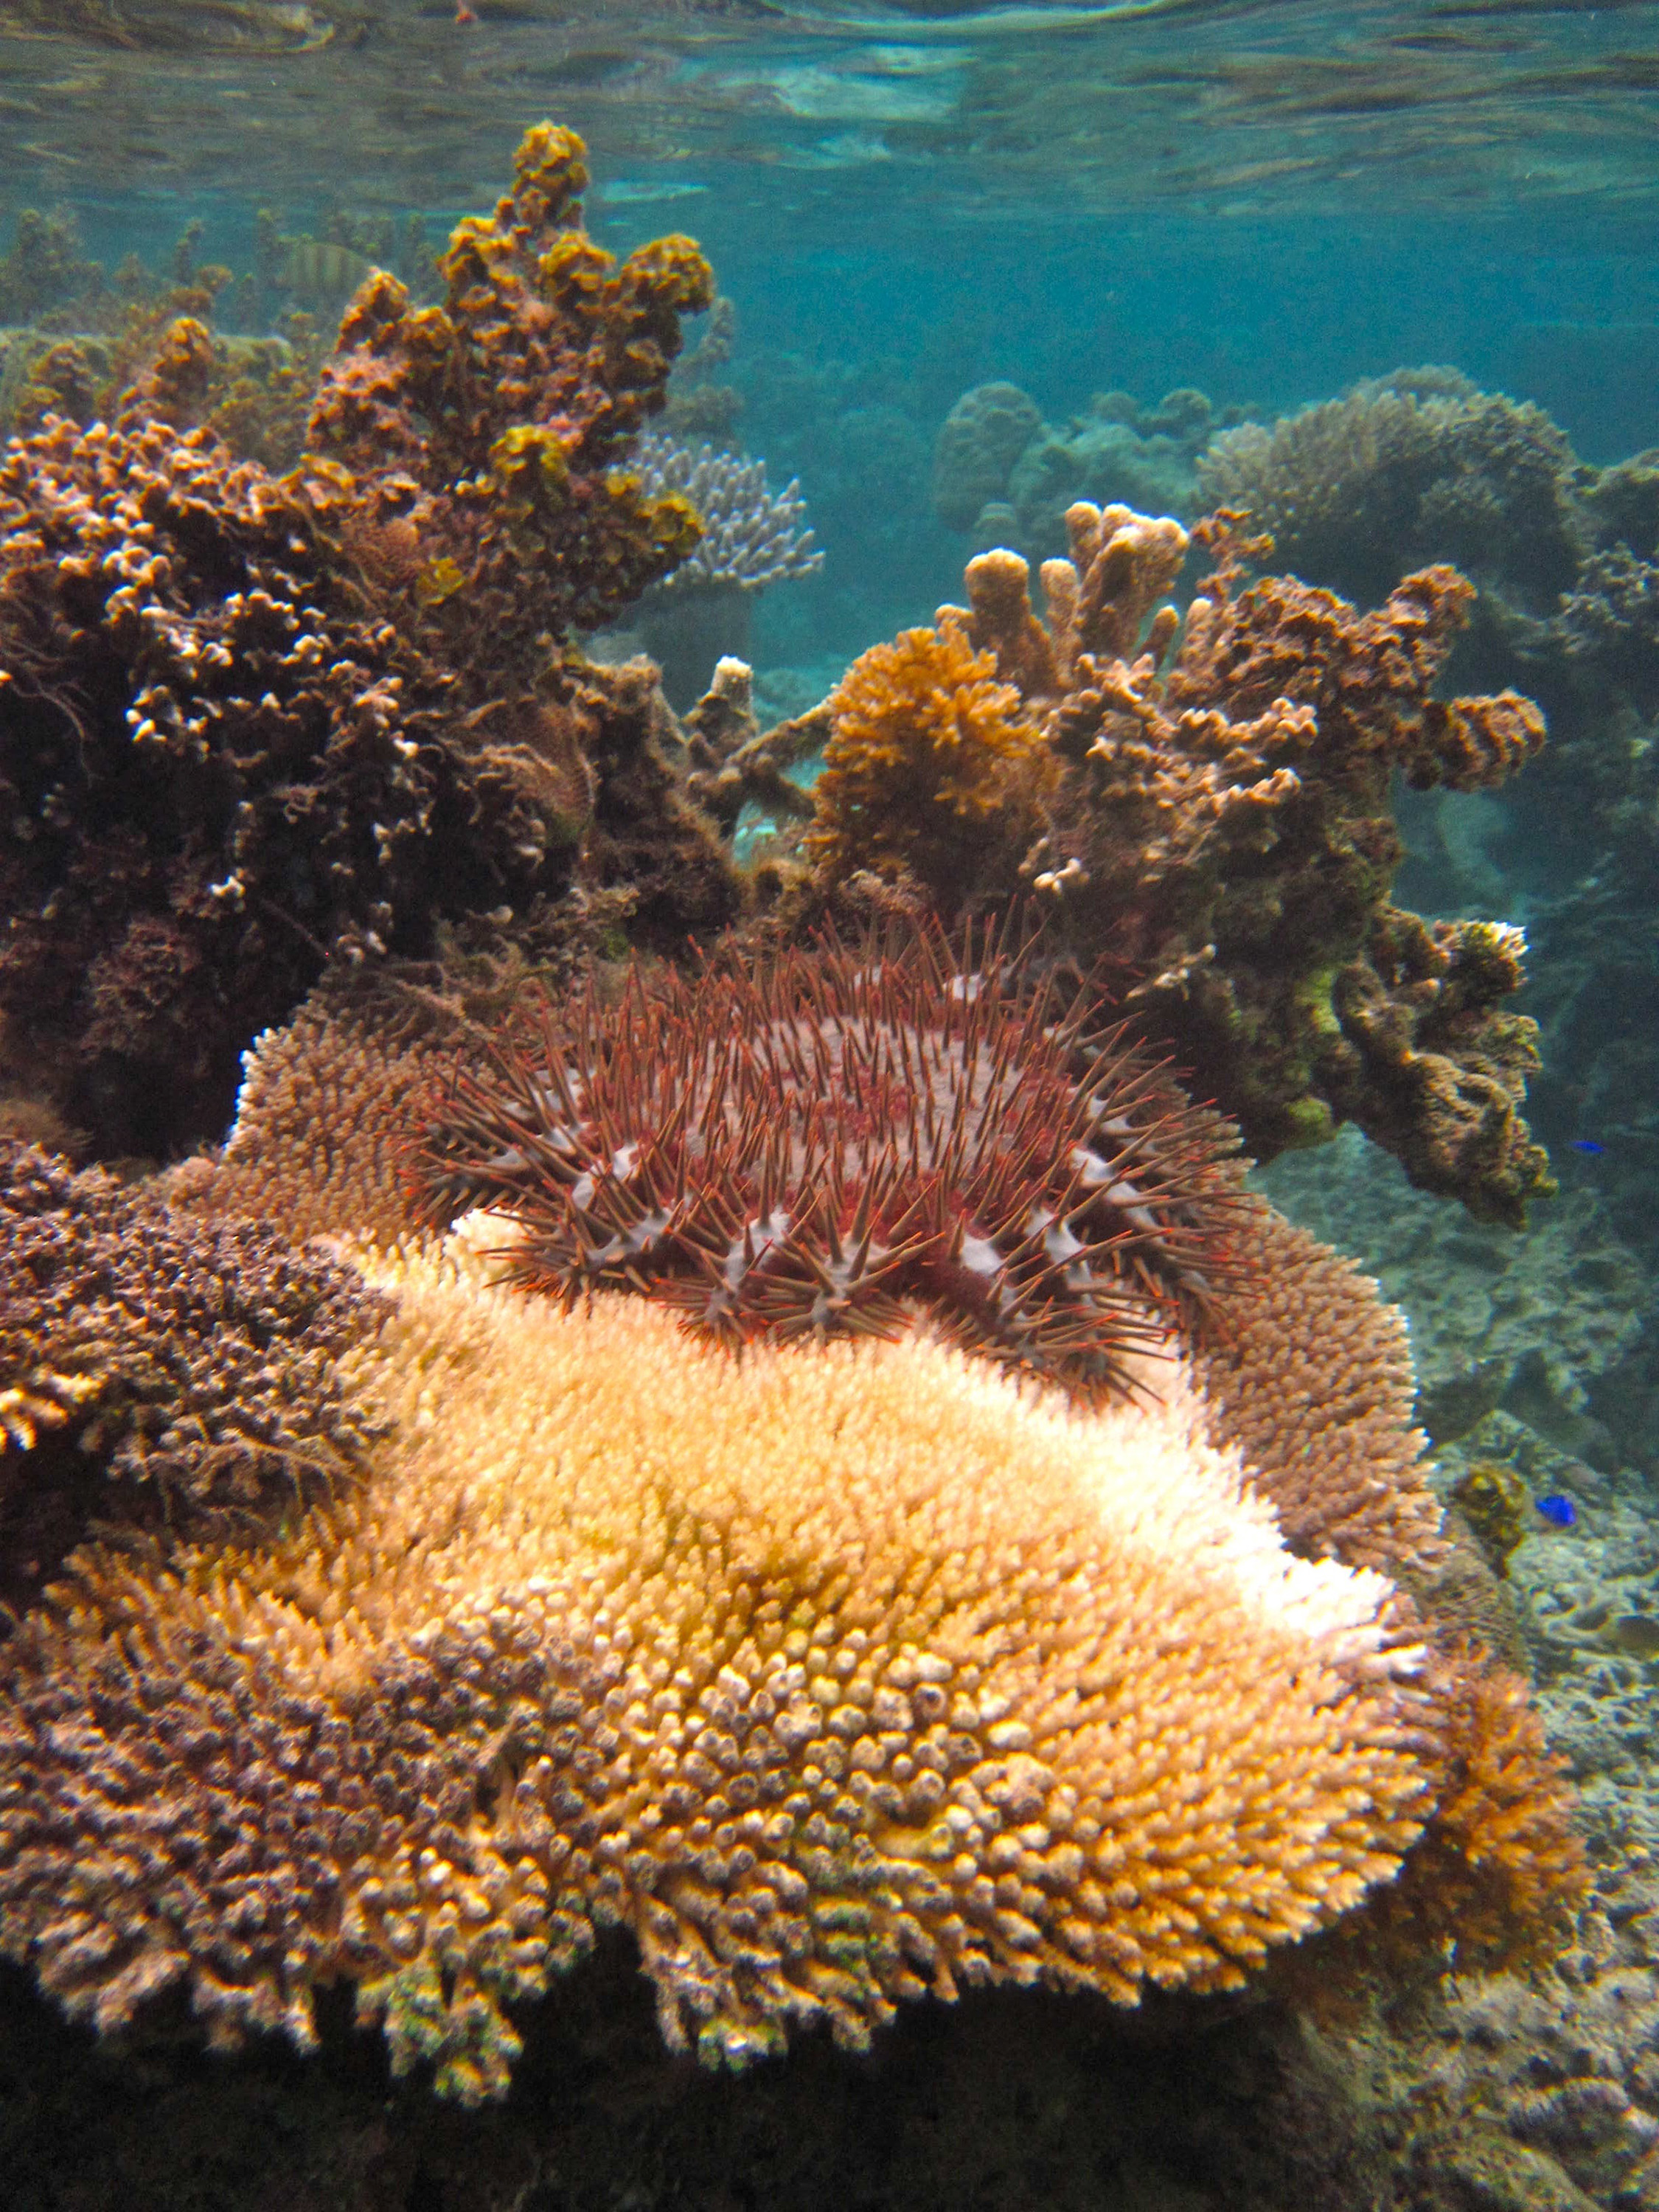 A crown-of-thorns sea star is shown on a coral reef in the Fiji Islands. Researchers found that the sea stars are a threat to small marine protected areas. (Credit: Cody Clements, Georgia Tech)